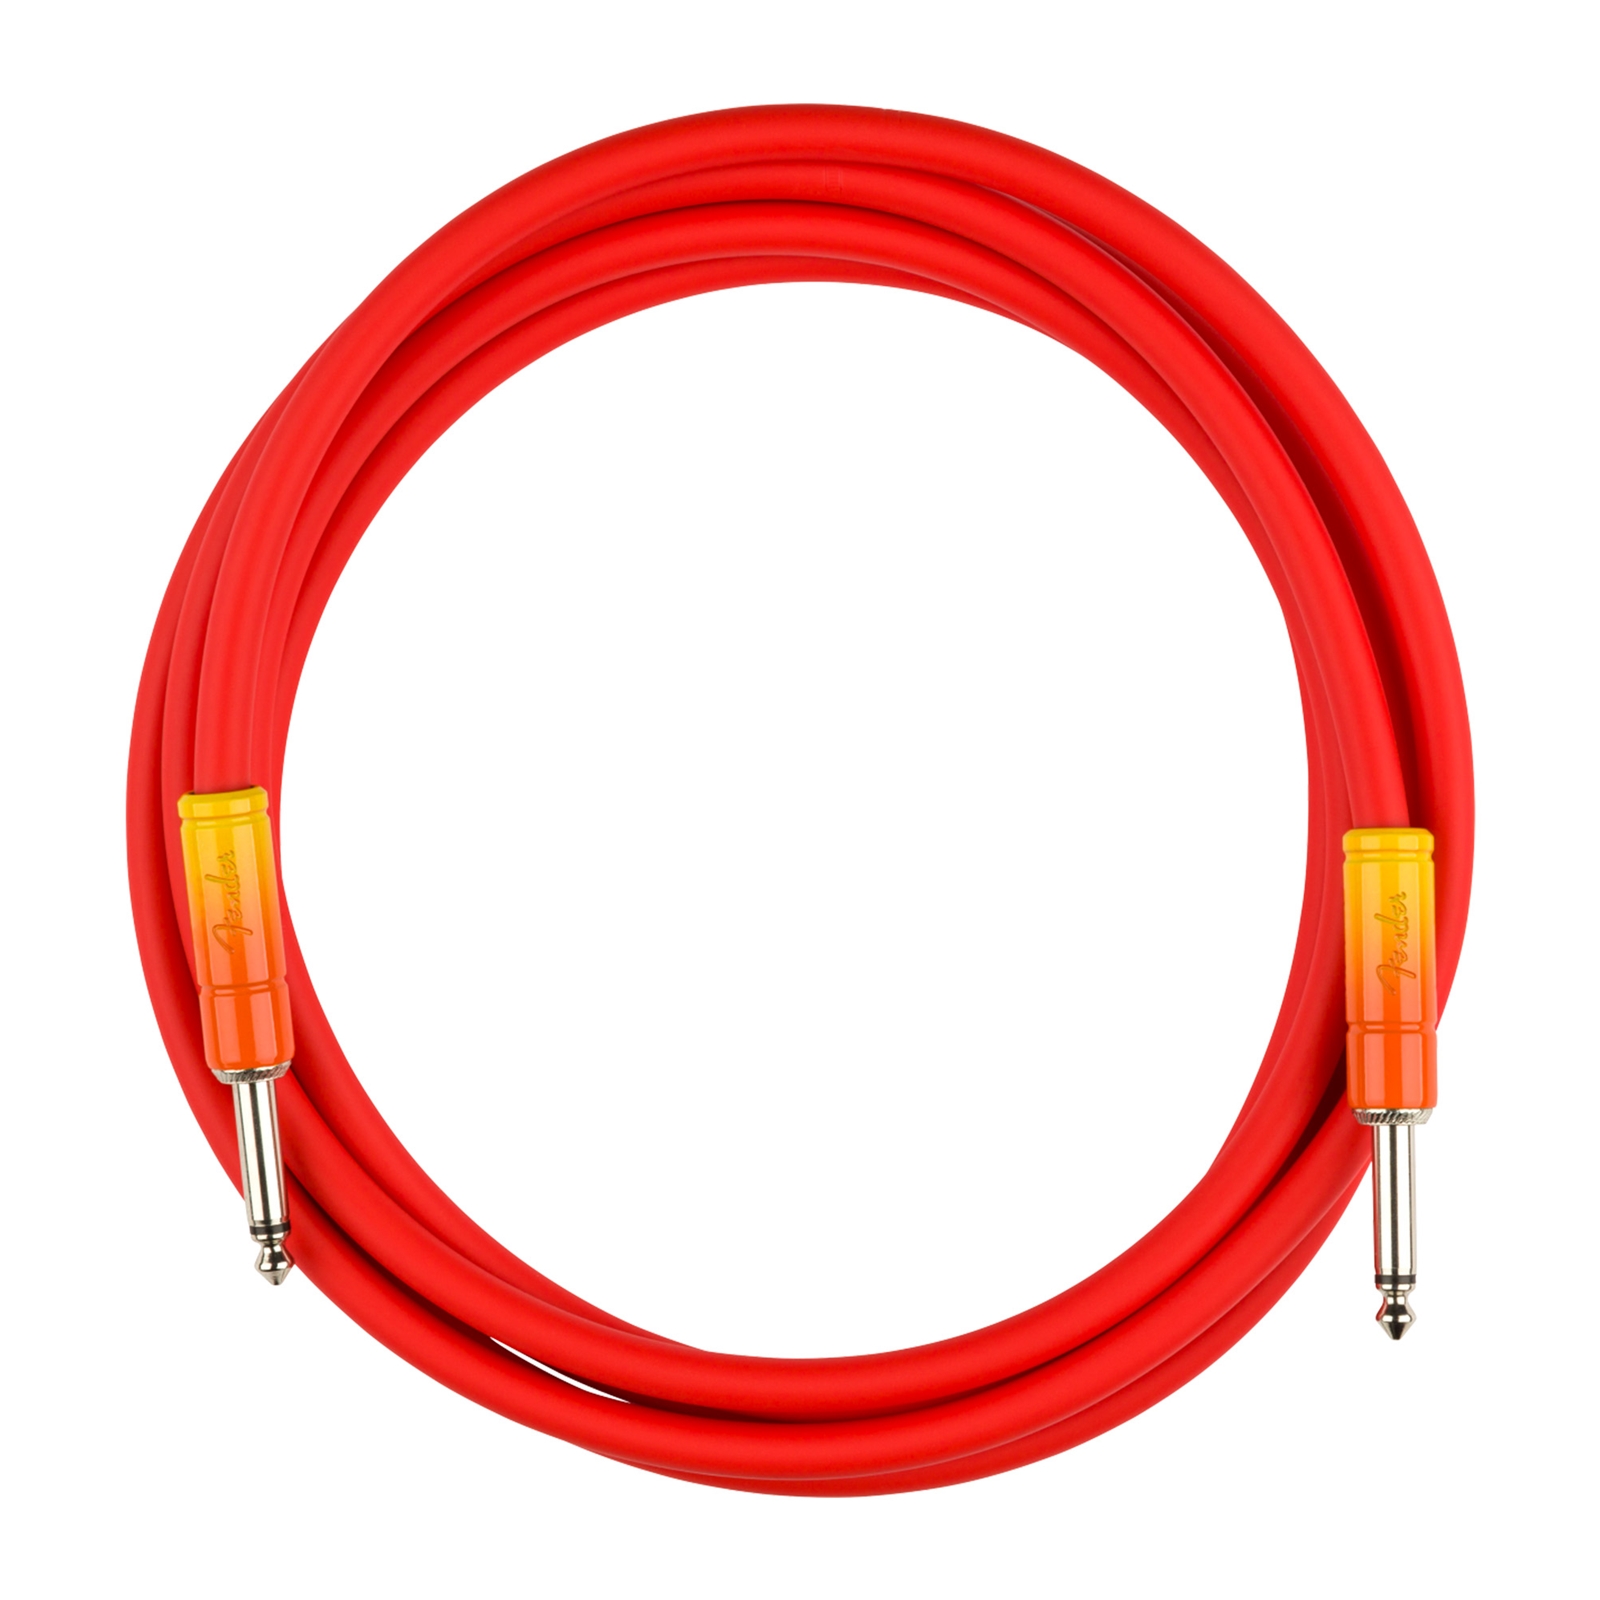 Fender 10-foot Ombre Instrument Cable